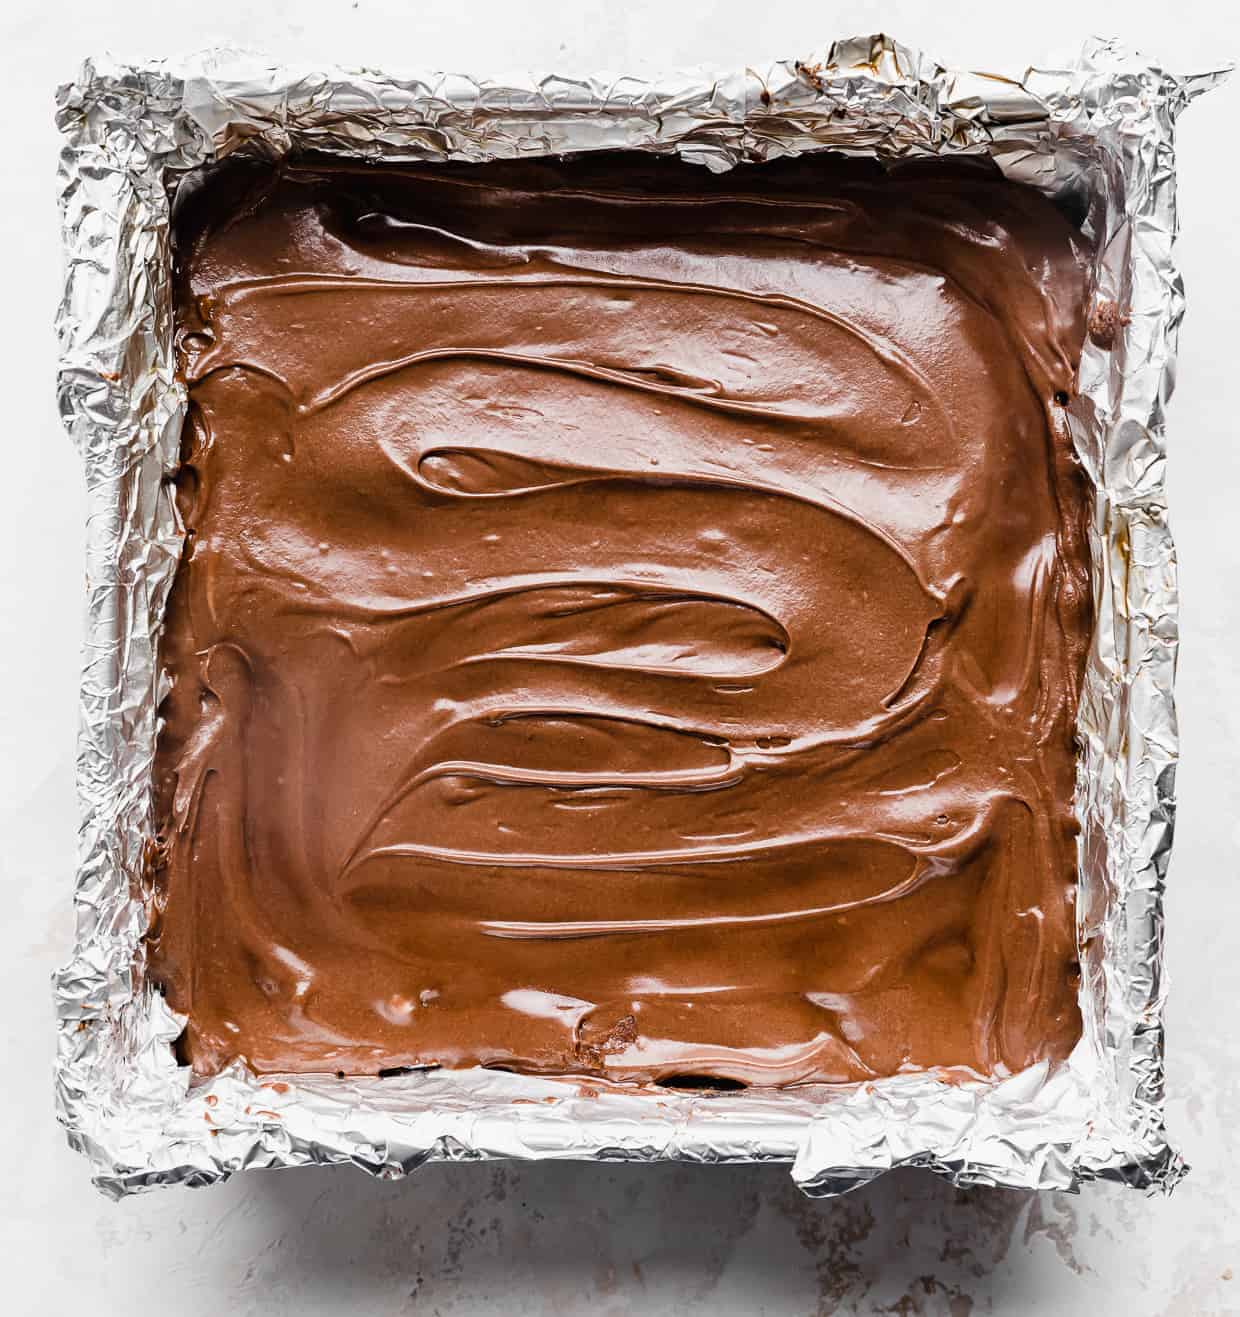 Freshly frosted lunch lady brownies in a foil lined square pan against a white background.